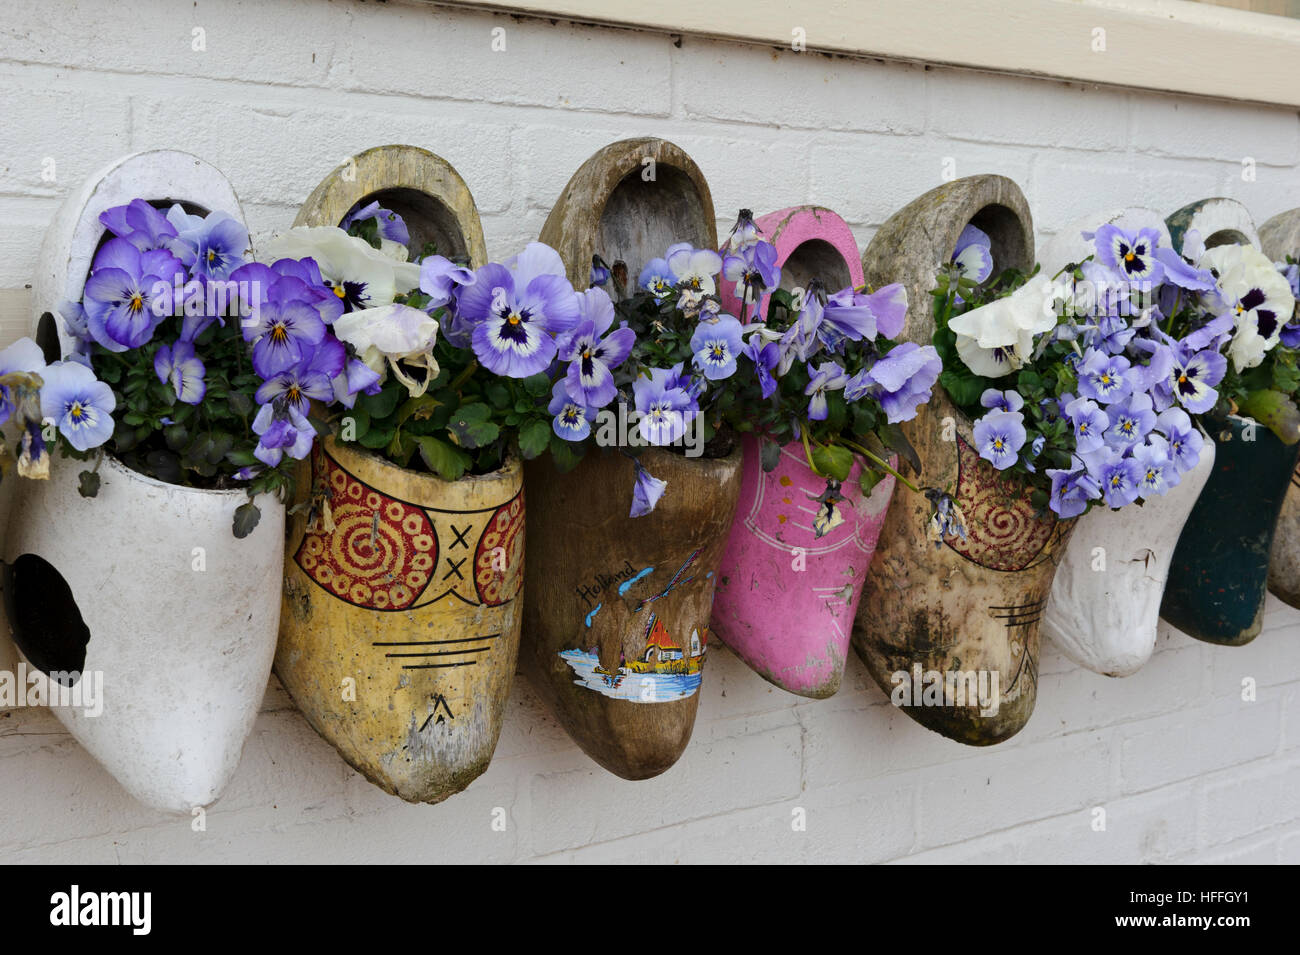 Old clogs decorated with fresh flowers on display on the exterior wall of a shop in Holland, Netherlands. Stock Photo